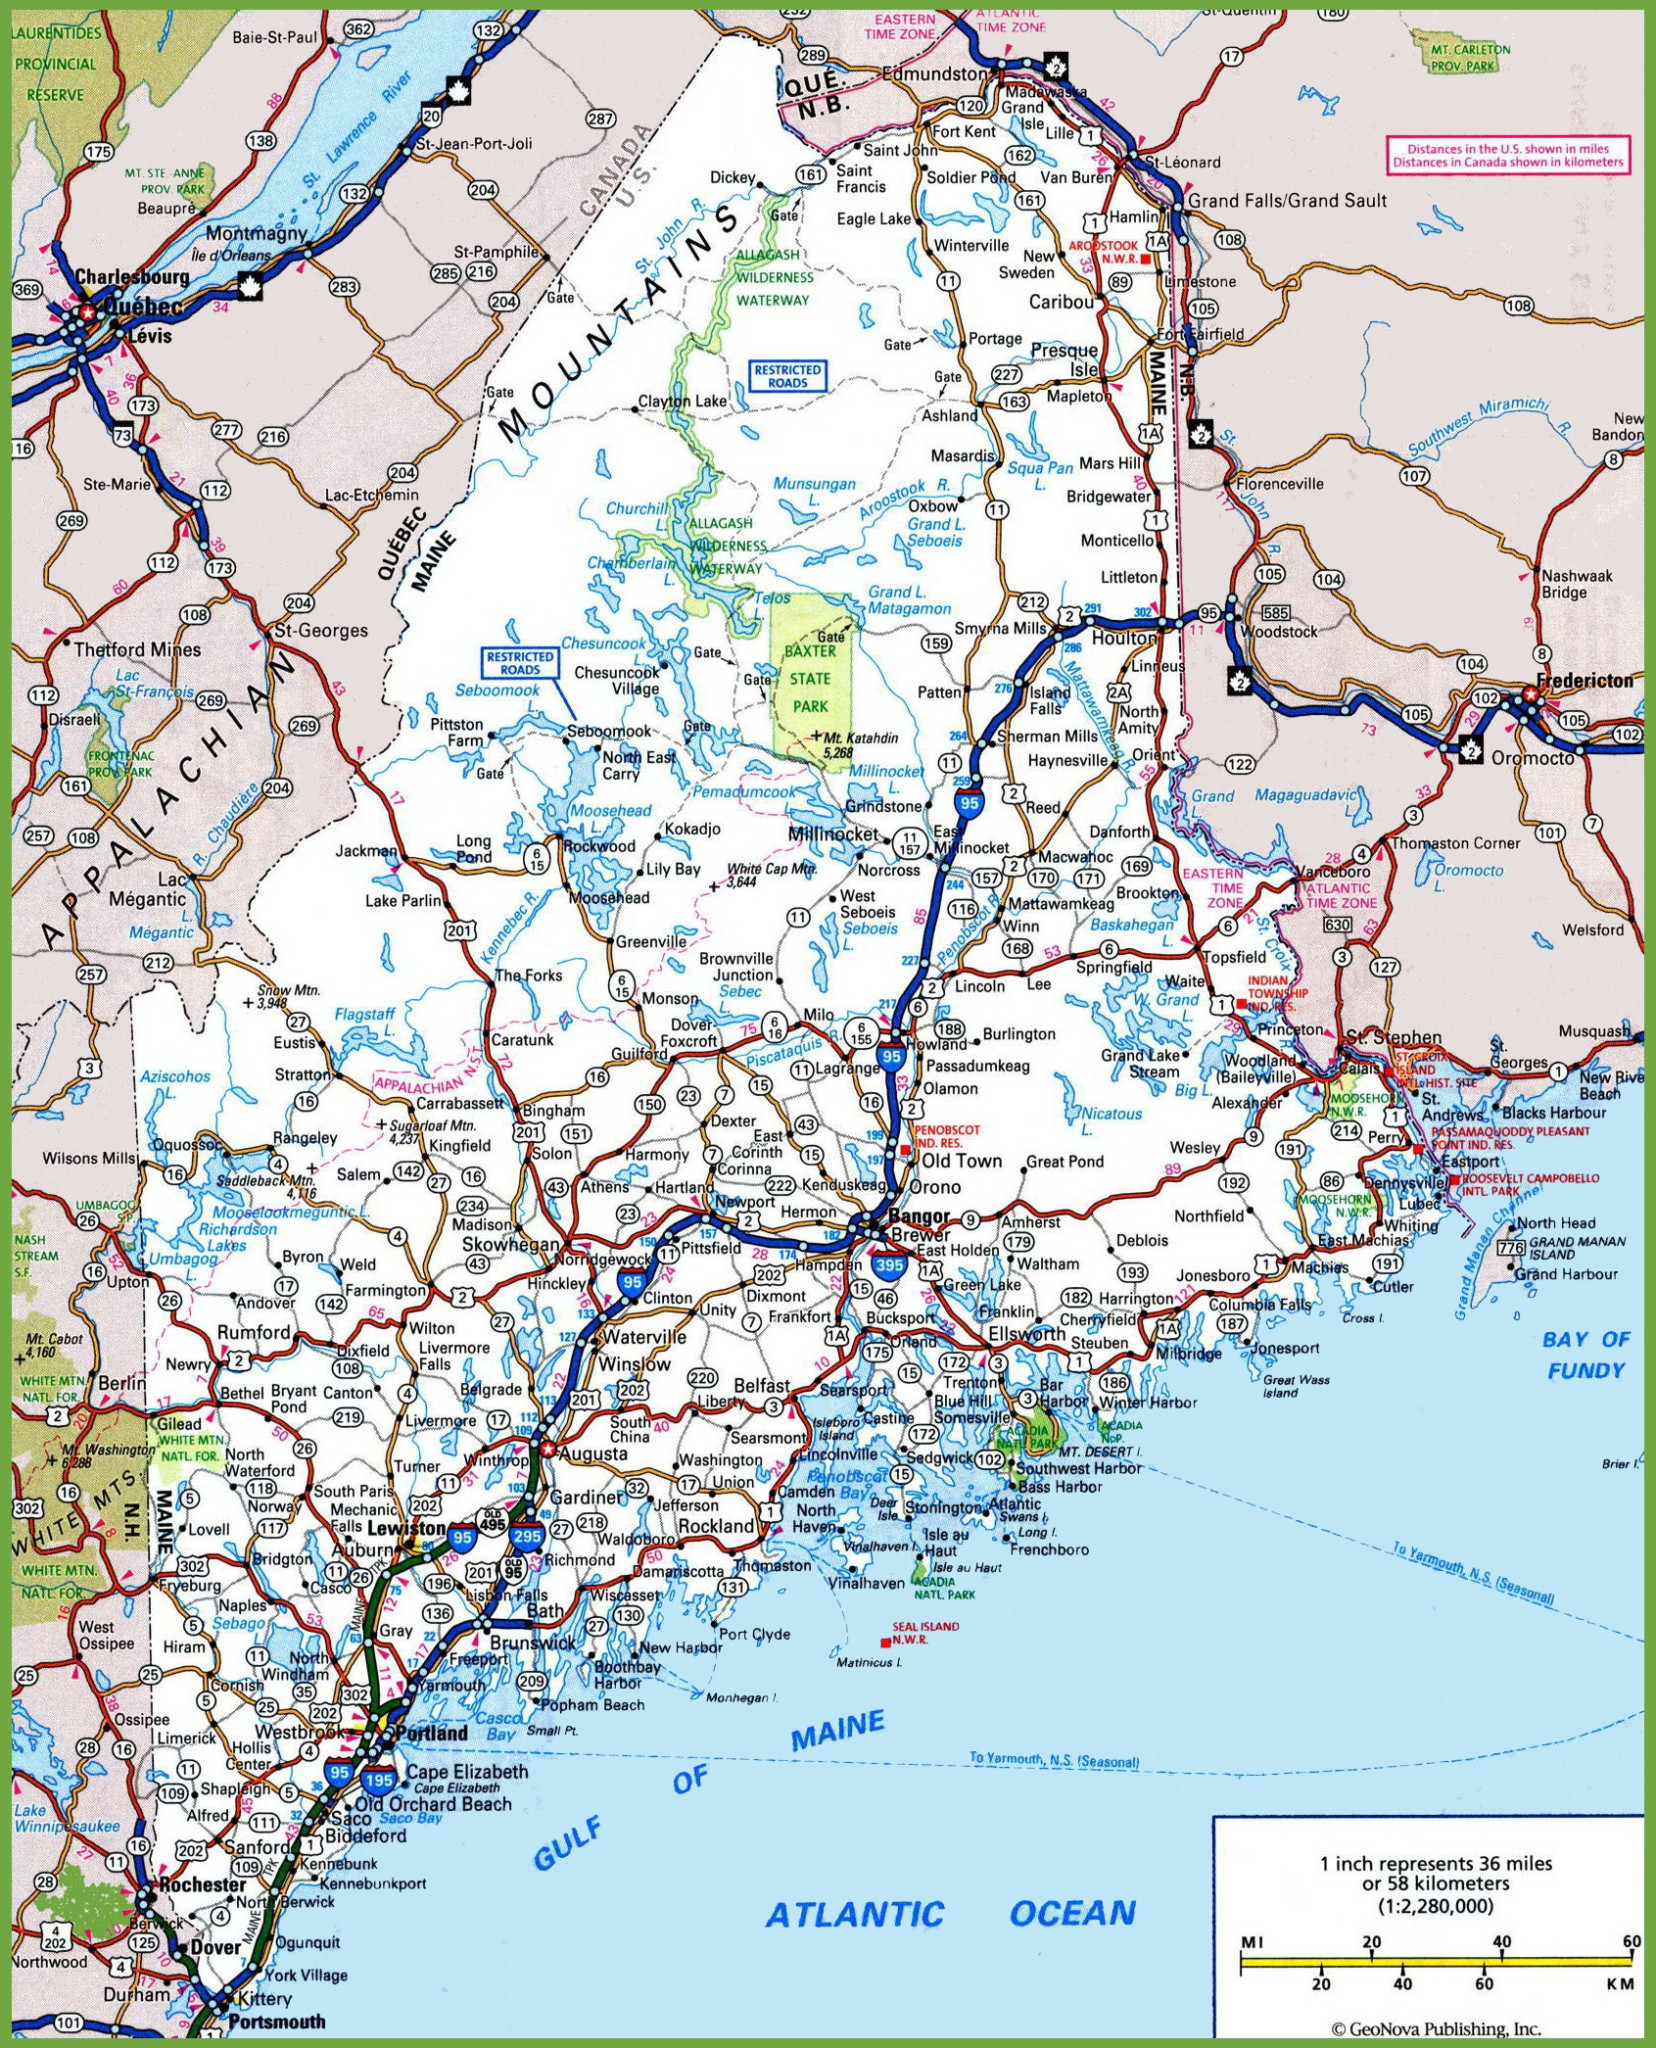 route 1 maine road trip map